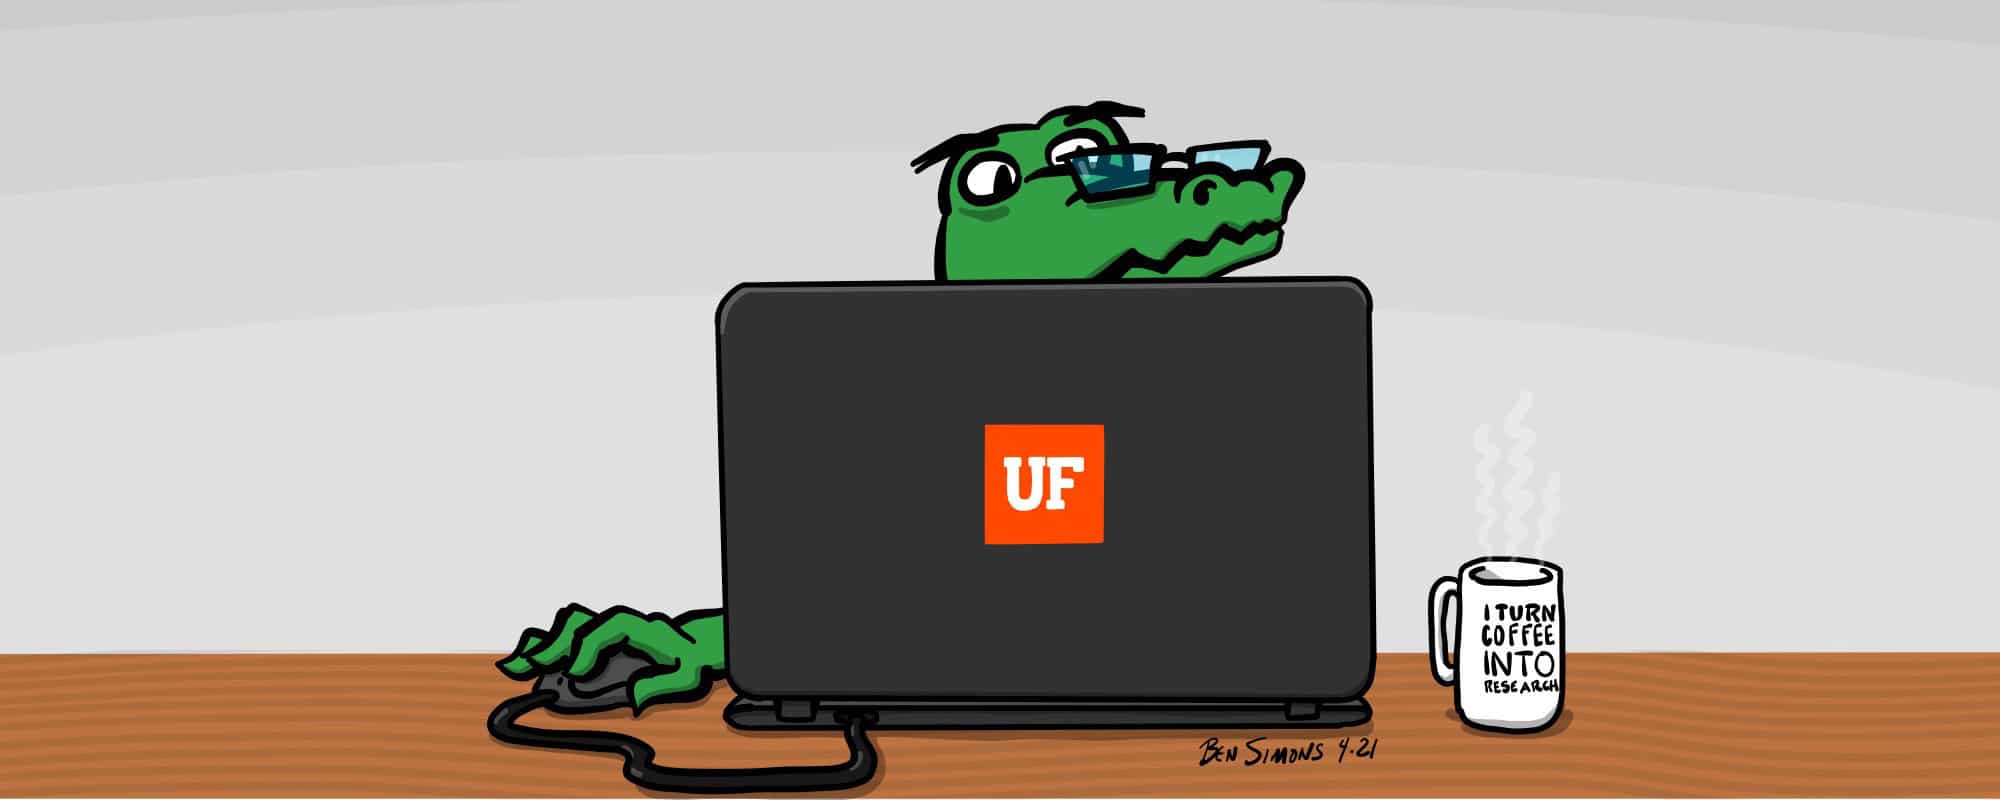 Illustration of a gator working on a laptop with a UF sticker on it, a coffee mug nearby says I turn coffee into research